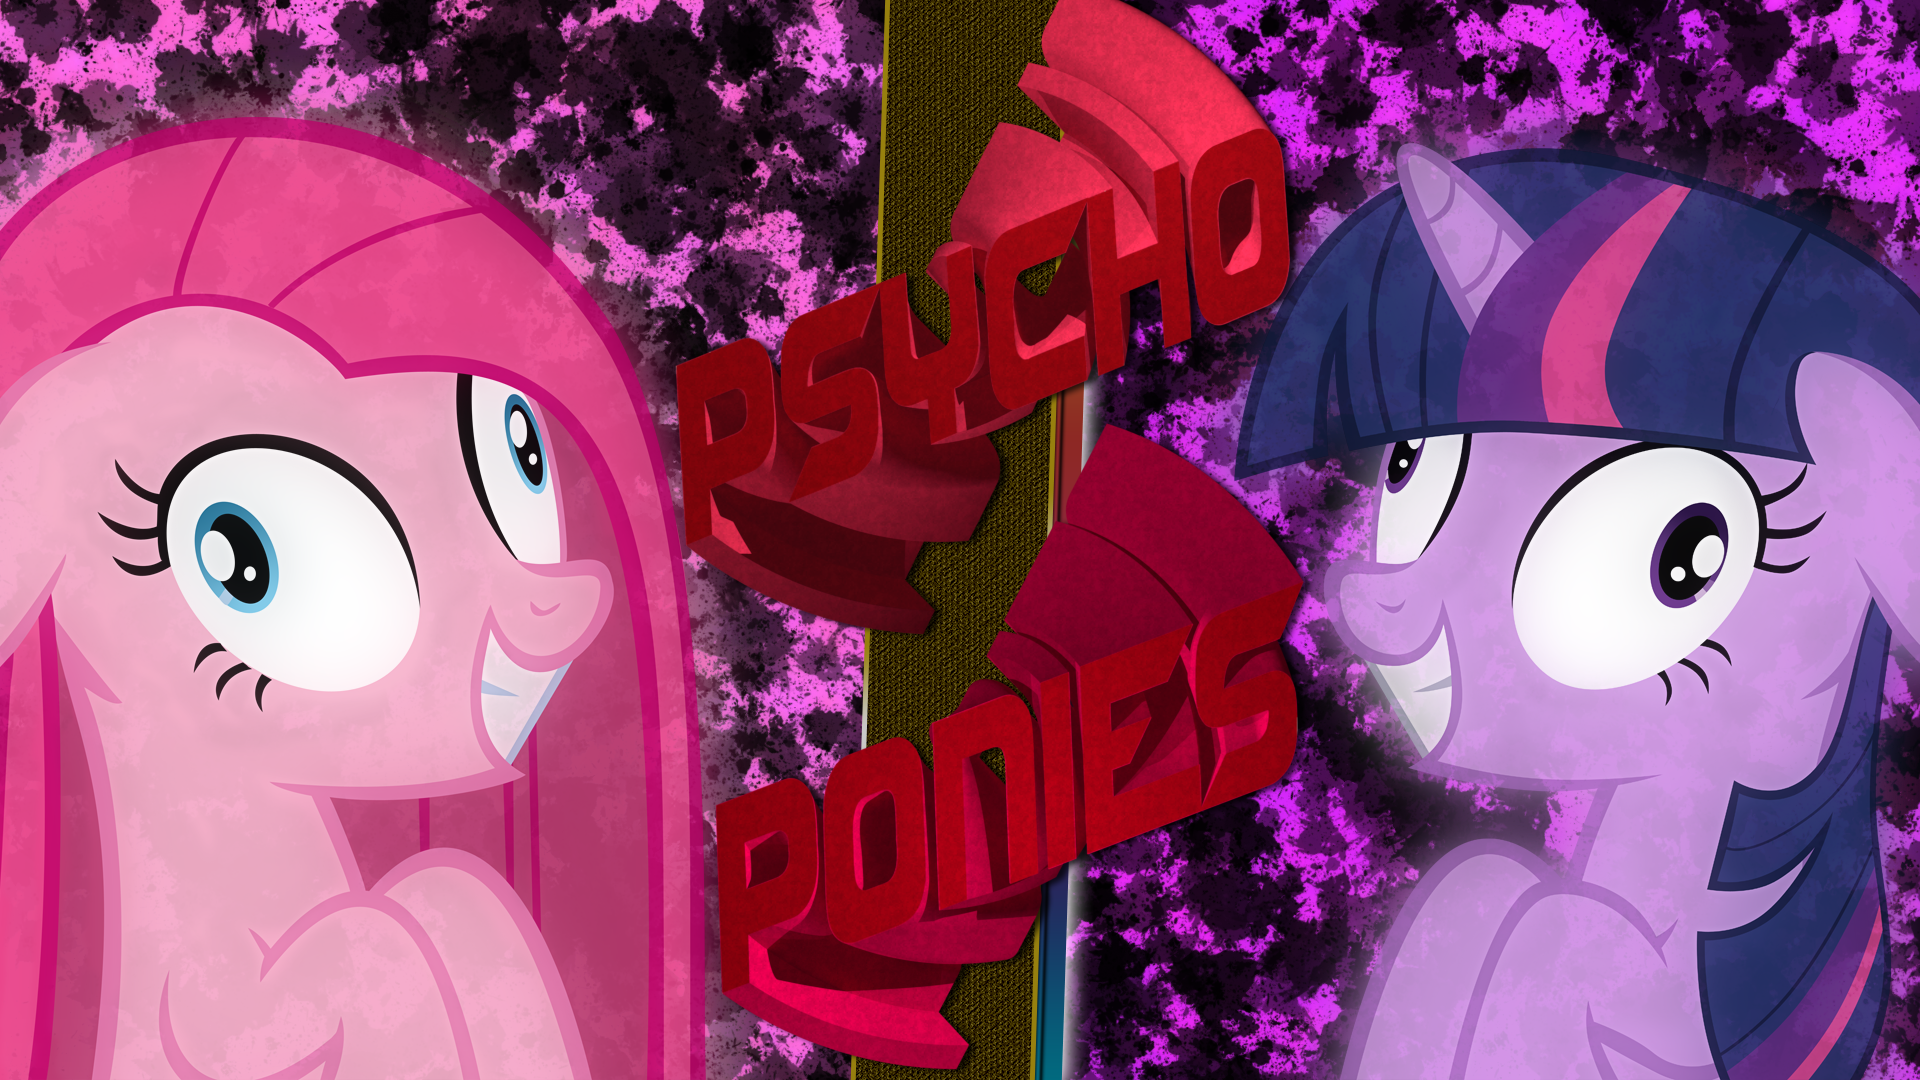 Psycho Ponies - Wallpaper by EmbersAtDawn, Ilonis and necromanteion